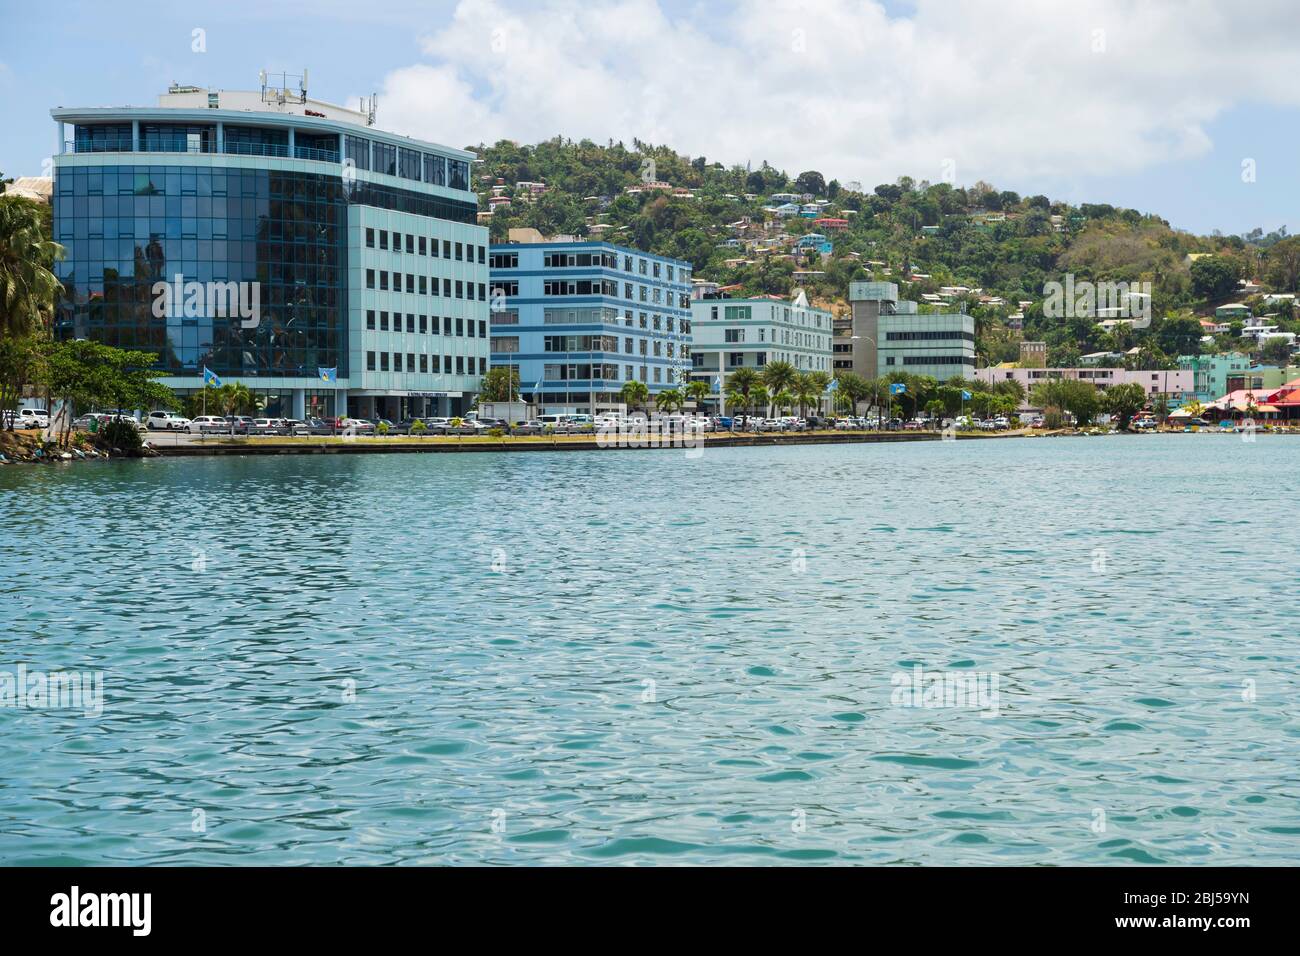 The waterfront in Castries, with multi-story buildings, and  no ships present due to the corona virus Stock Photo